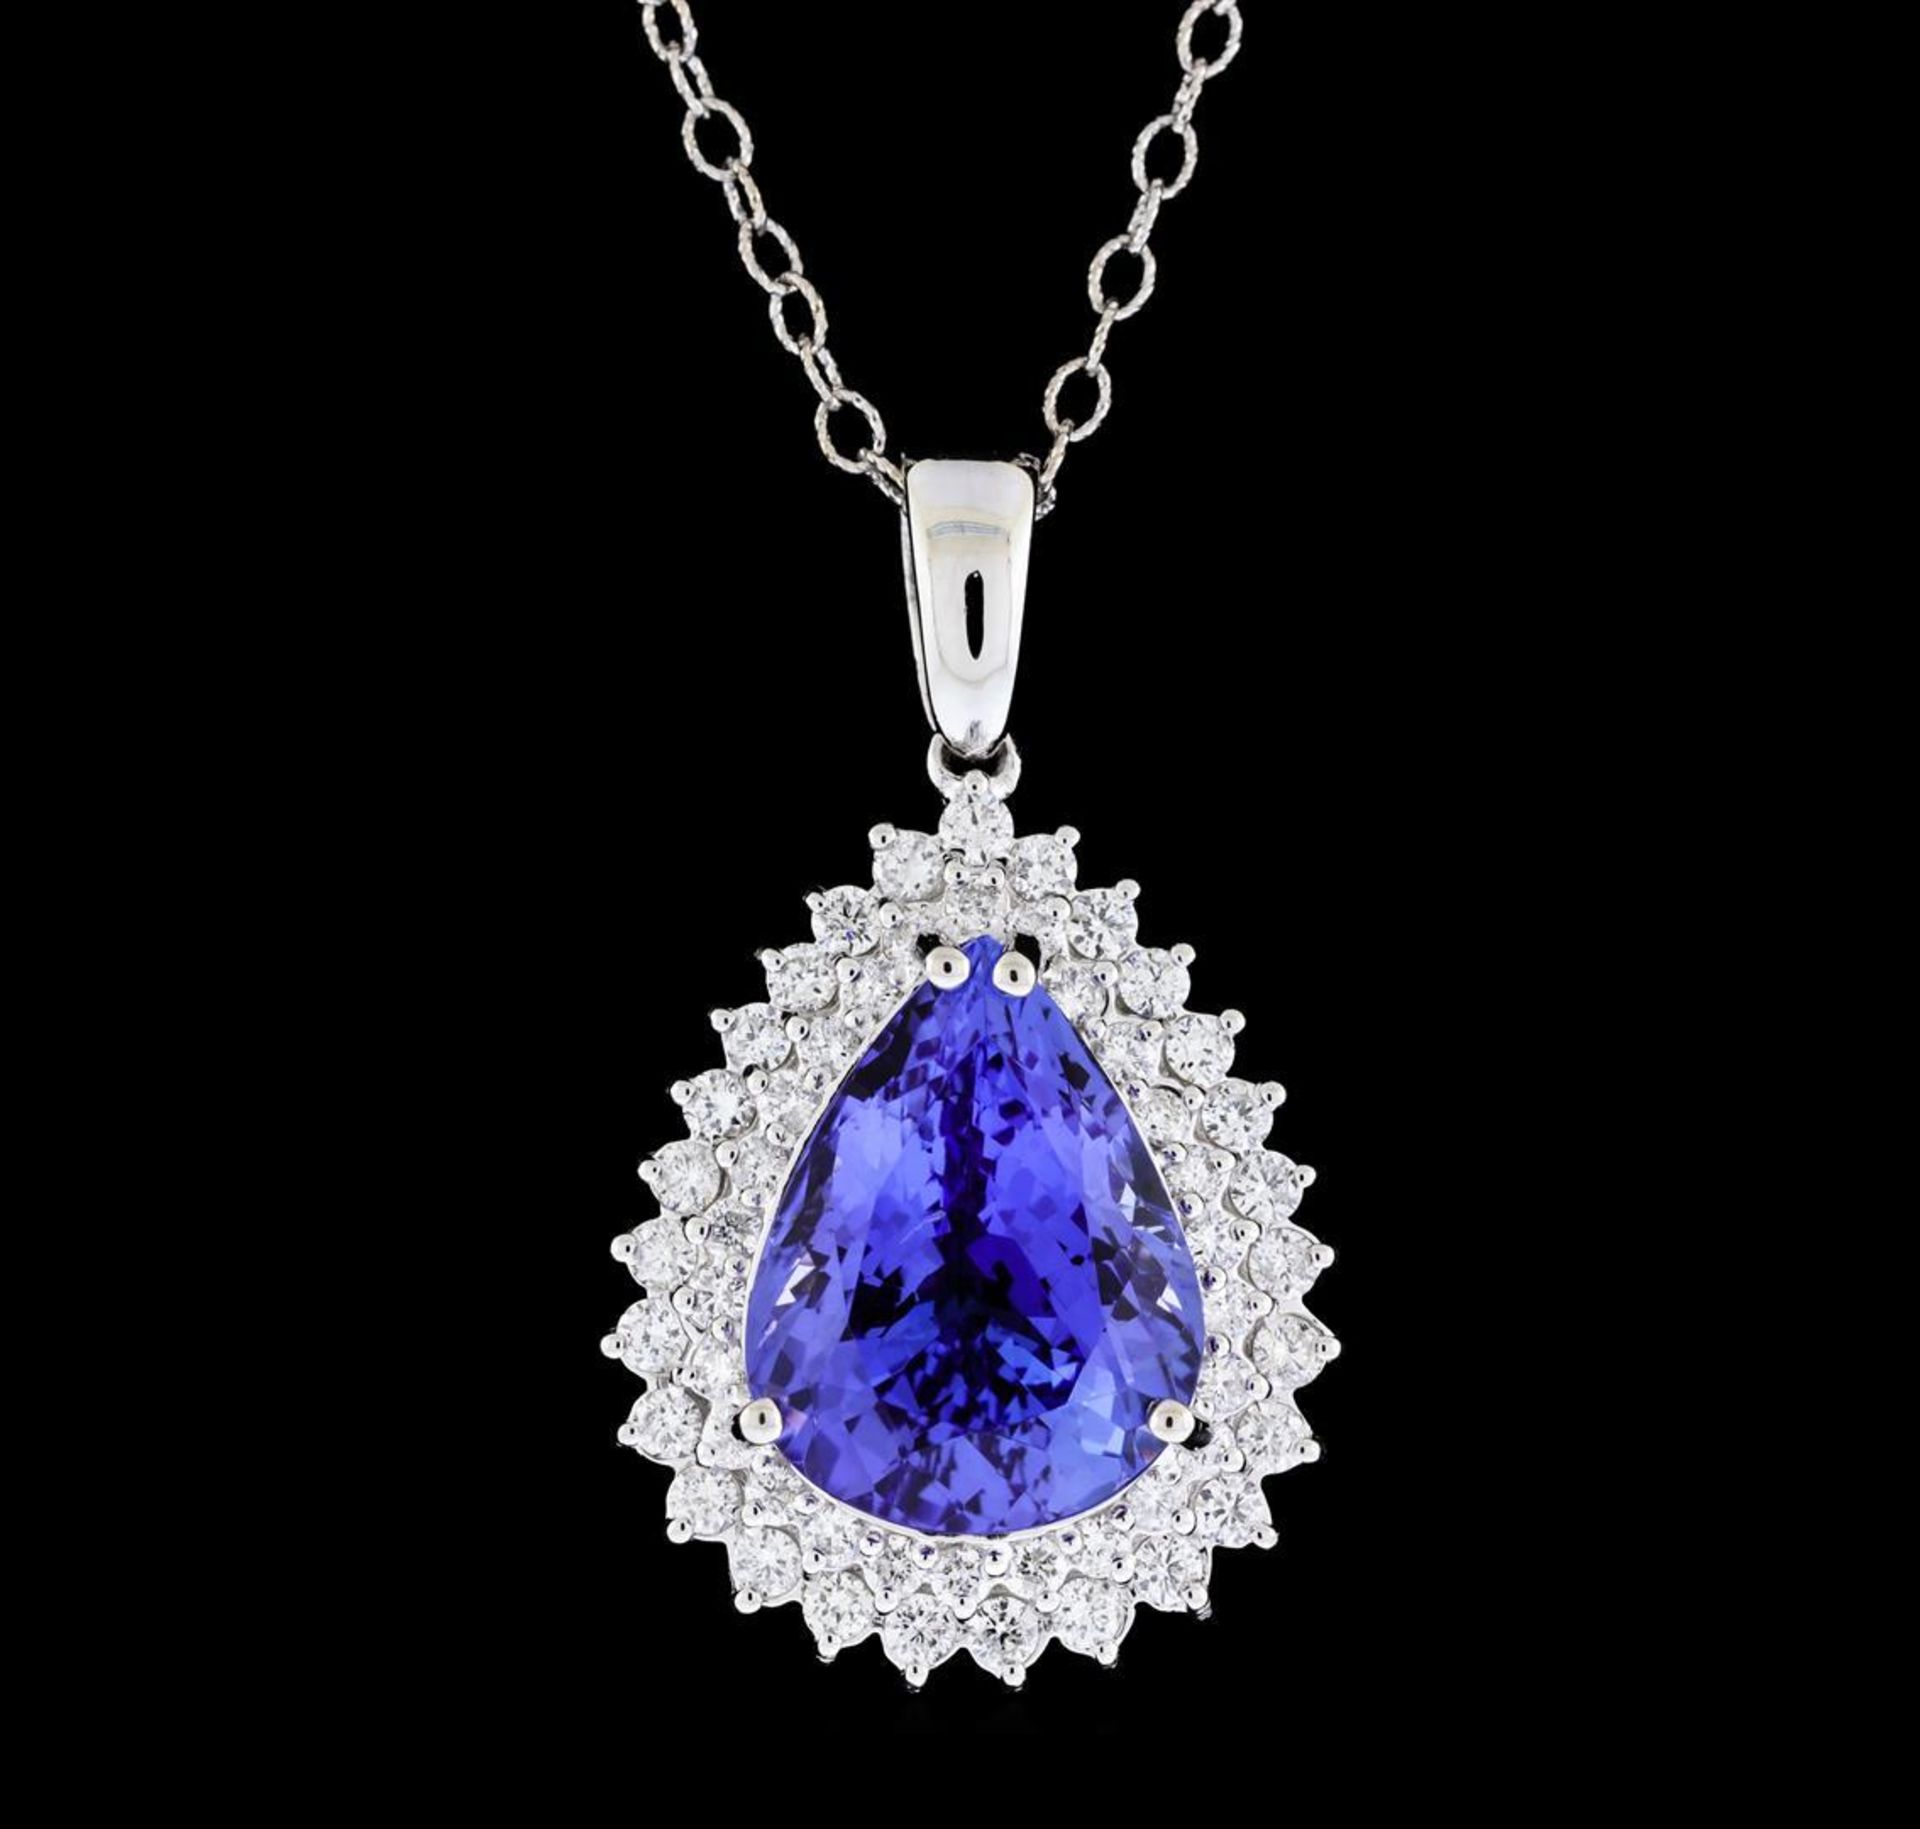 10.79 ctw Tanzanite and Diamond Pendant With Chain - 14KT White Gold - Image 2 of 3